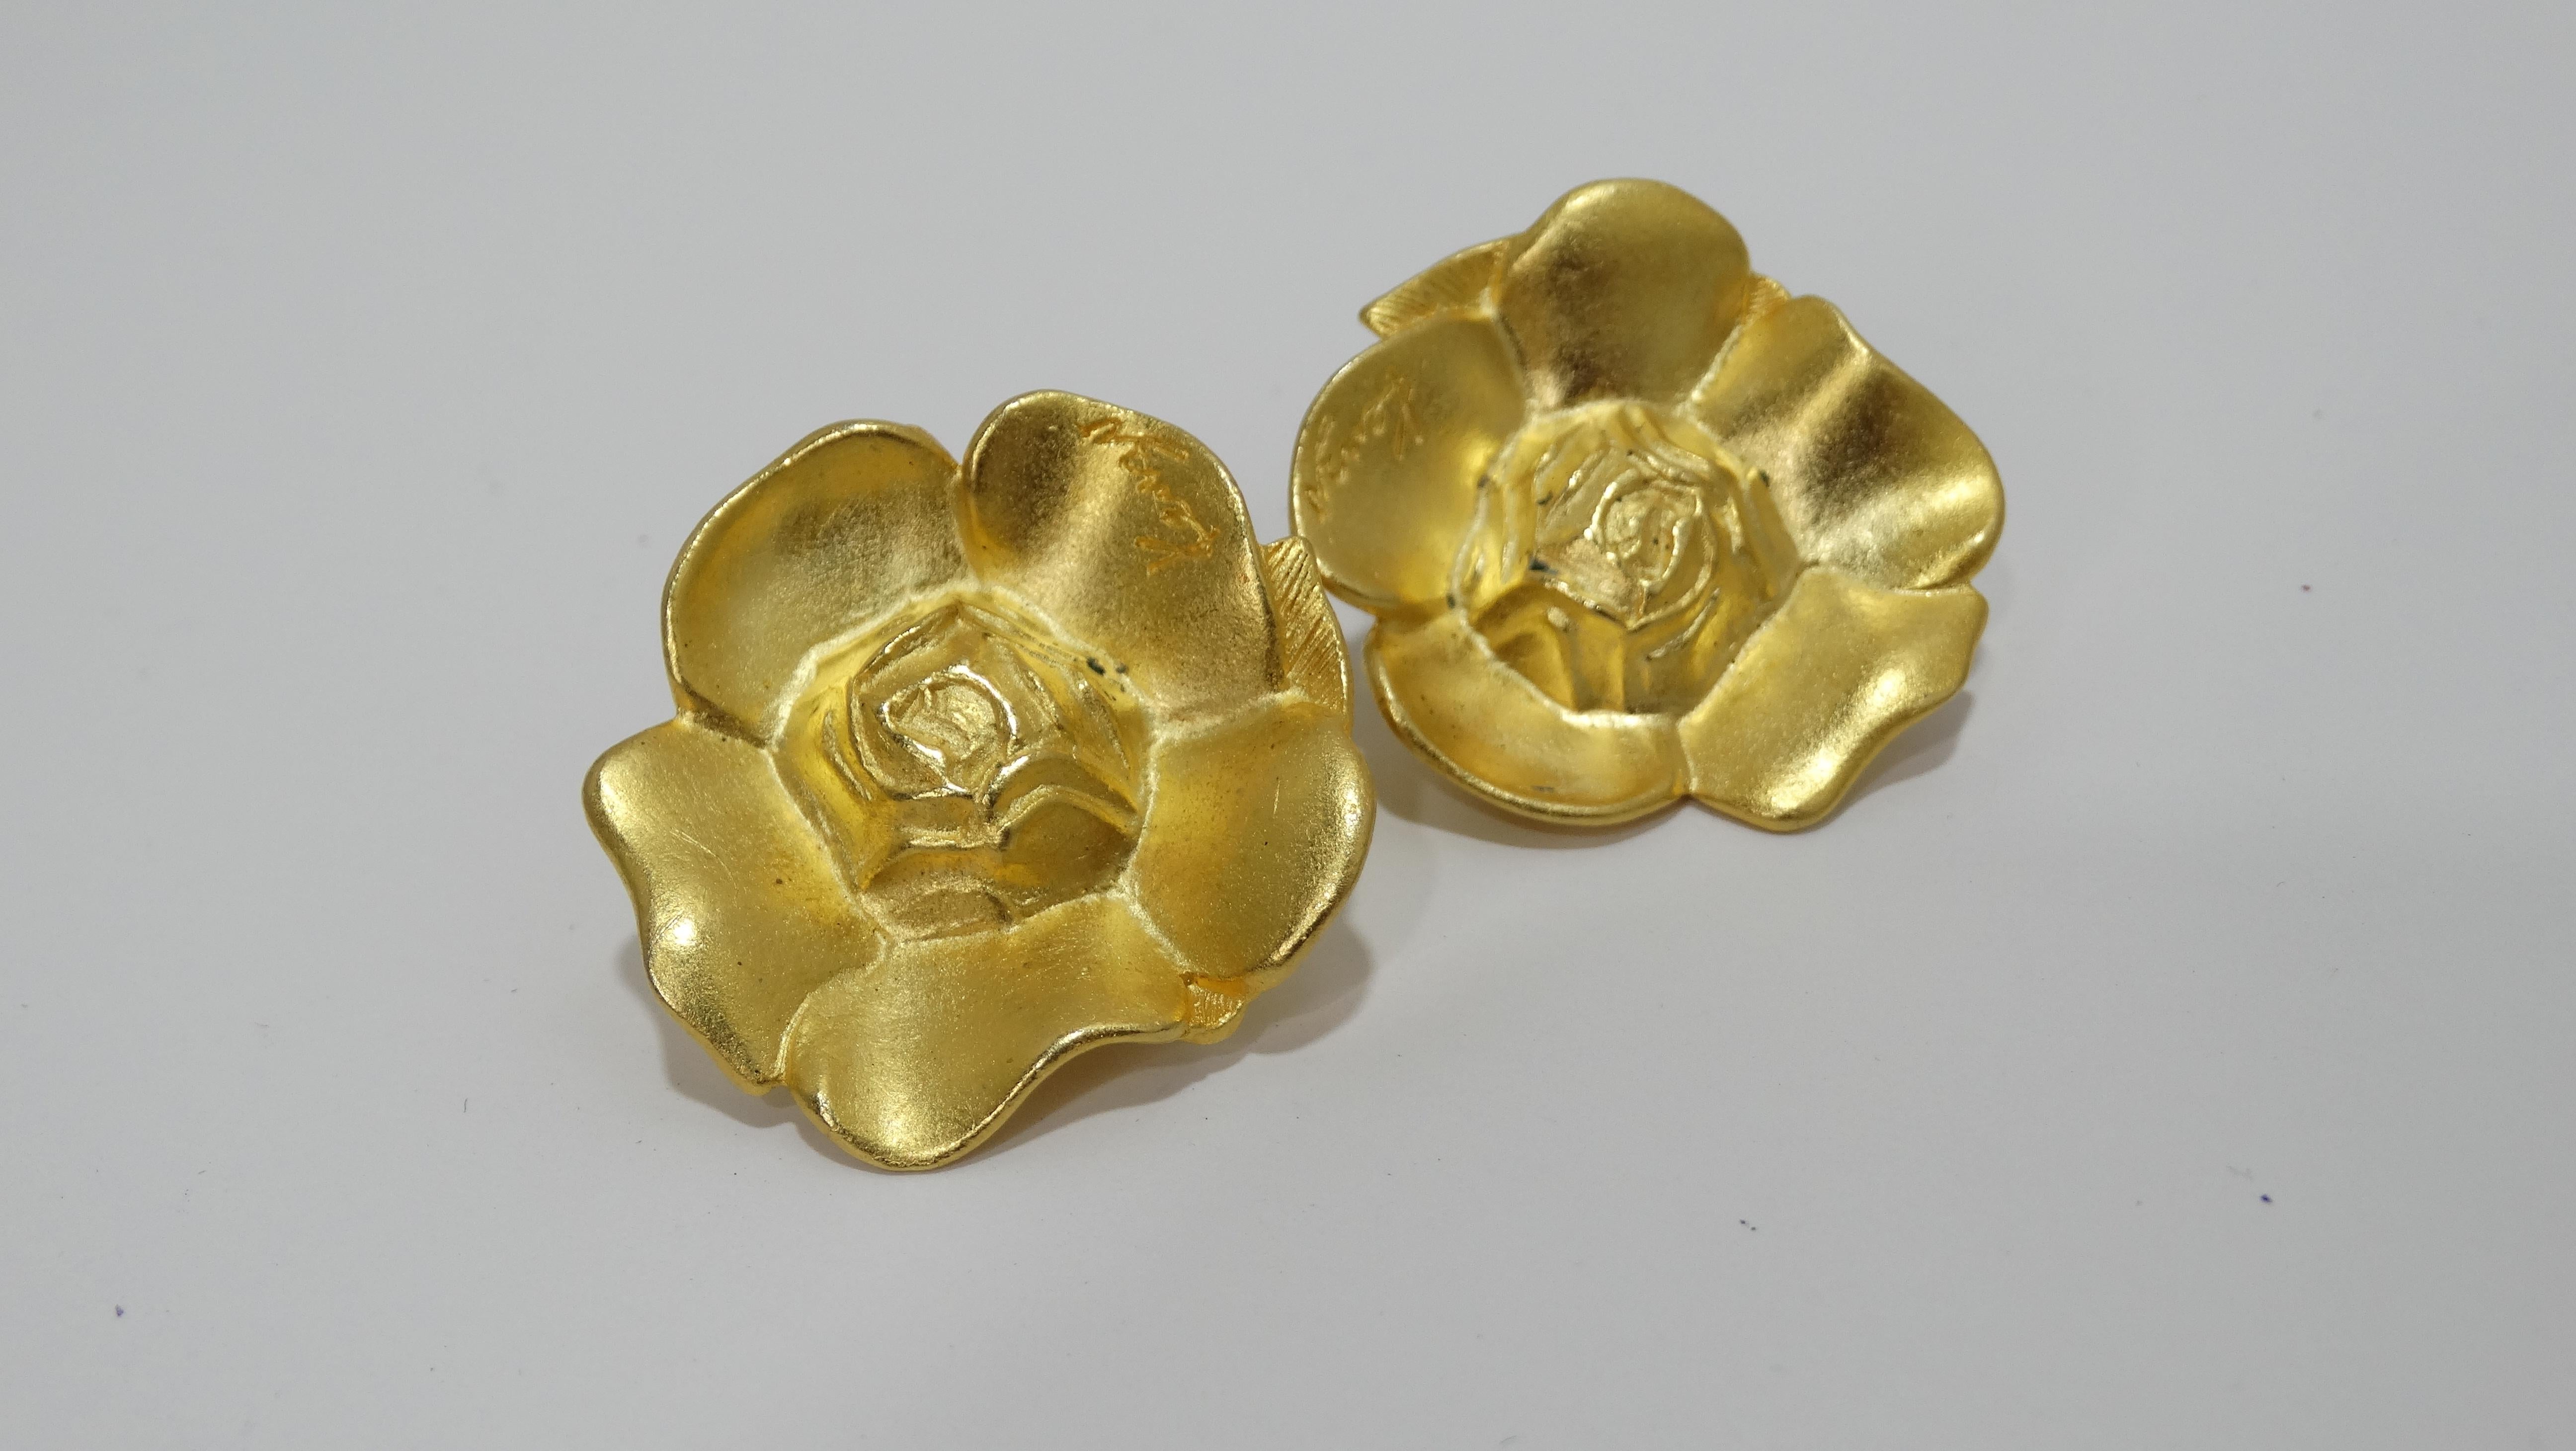 Get your hands on some rare vintage Kenzo jewelry! Dramatic with rich gold tones, these vintage Kenzo floral earrings are from the 1990's and made in Paris. The design features a detail floral casting plated with a brilliant gold tone plate. Pair